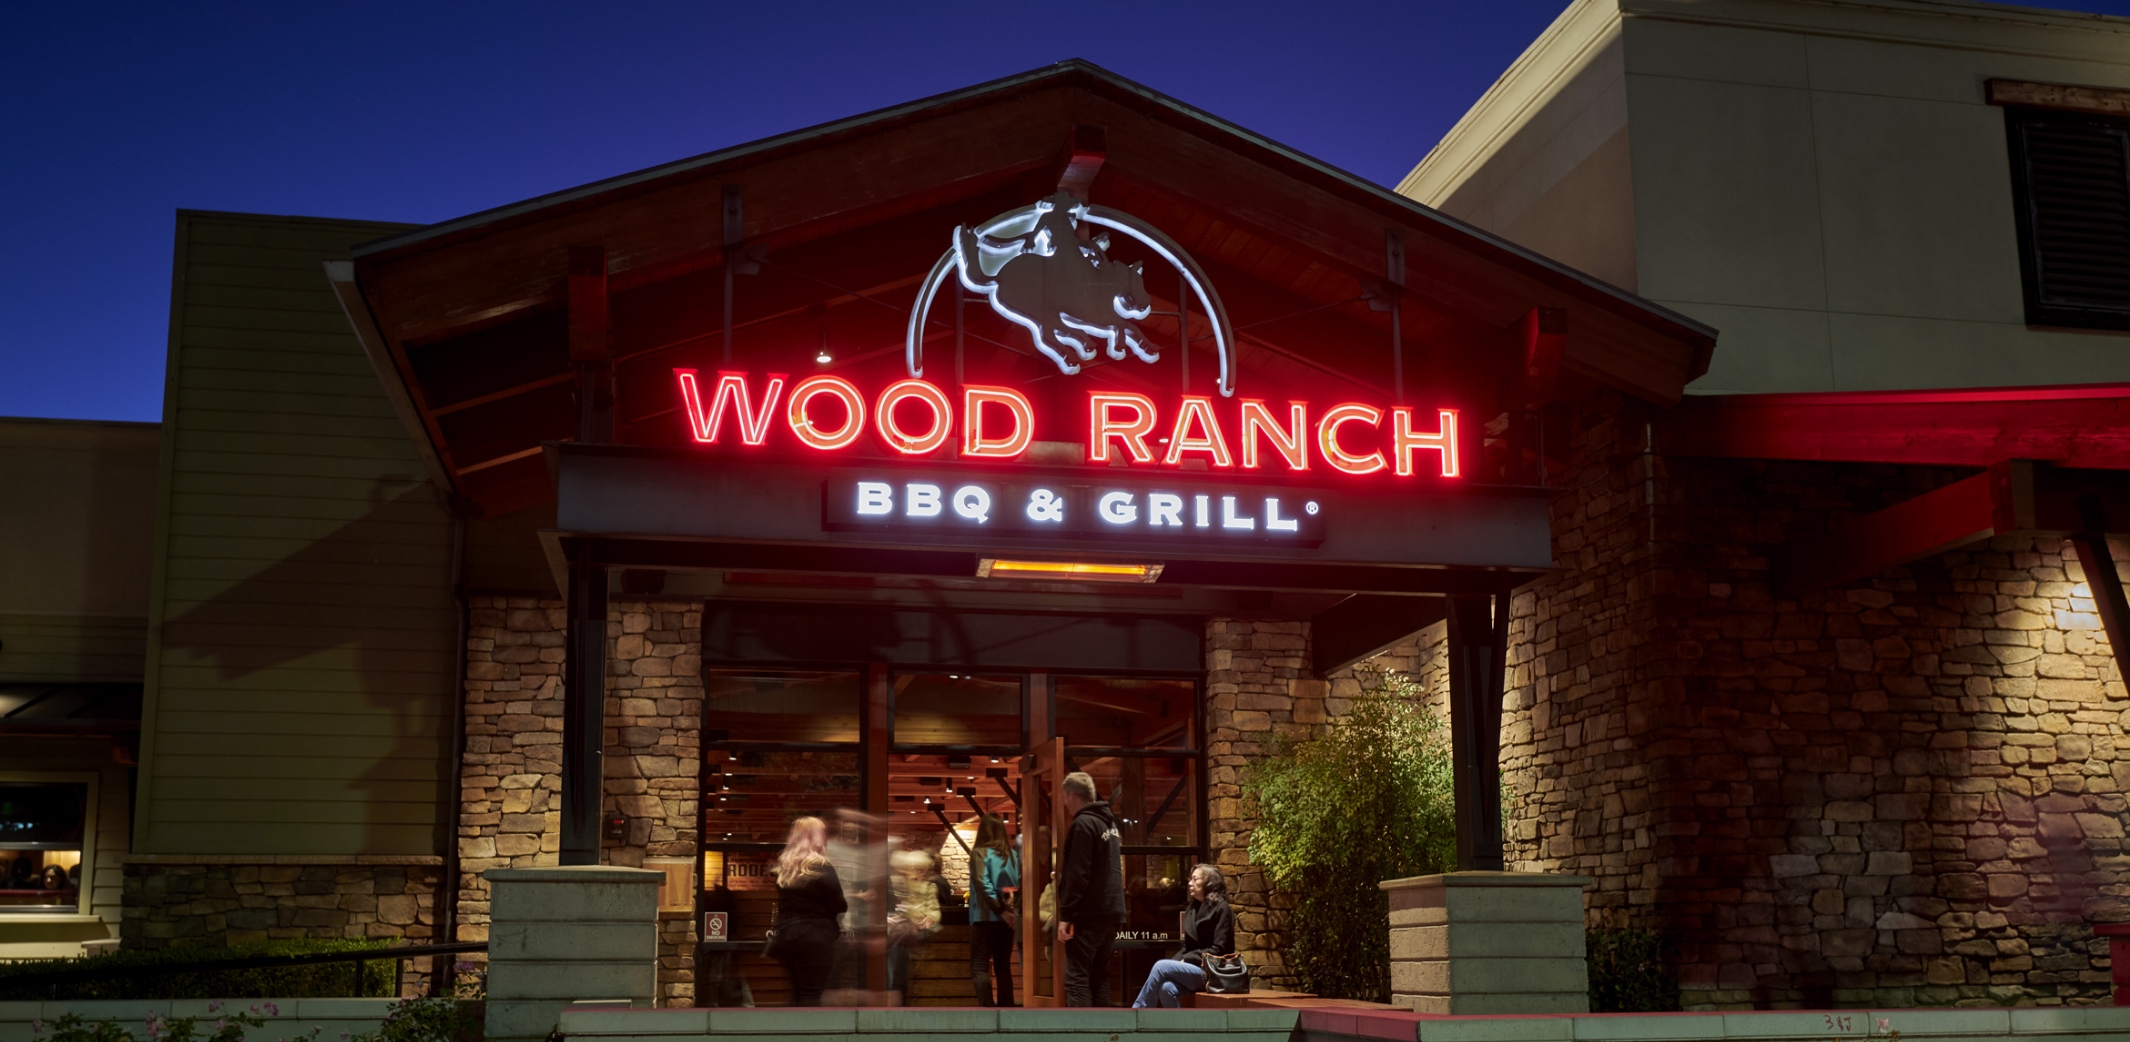 The exterior of Wood Ranch BBQ & Grill in Ventura at twilight with the restaurant's neon sign glowing, welcoming guests into the cozy, stone-clad building.